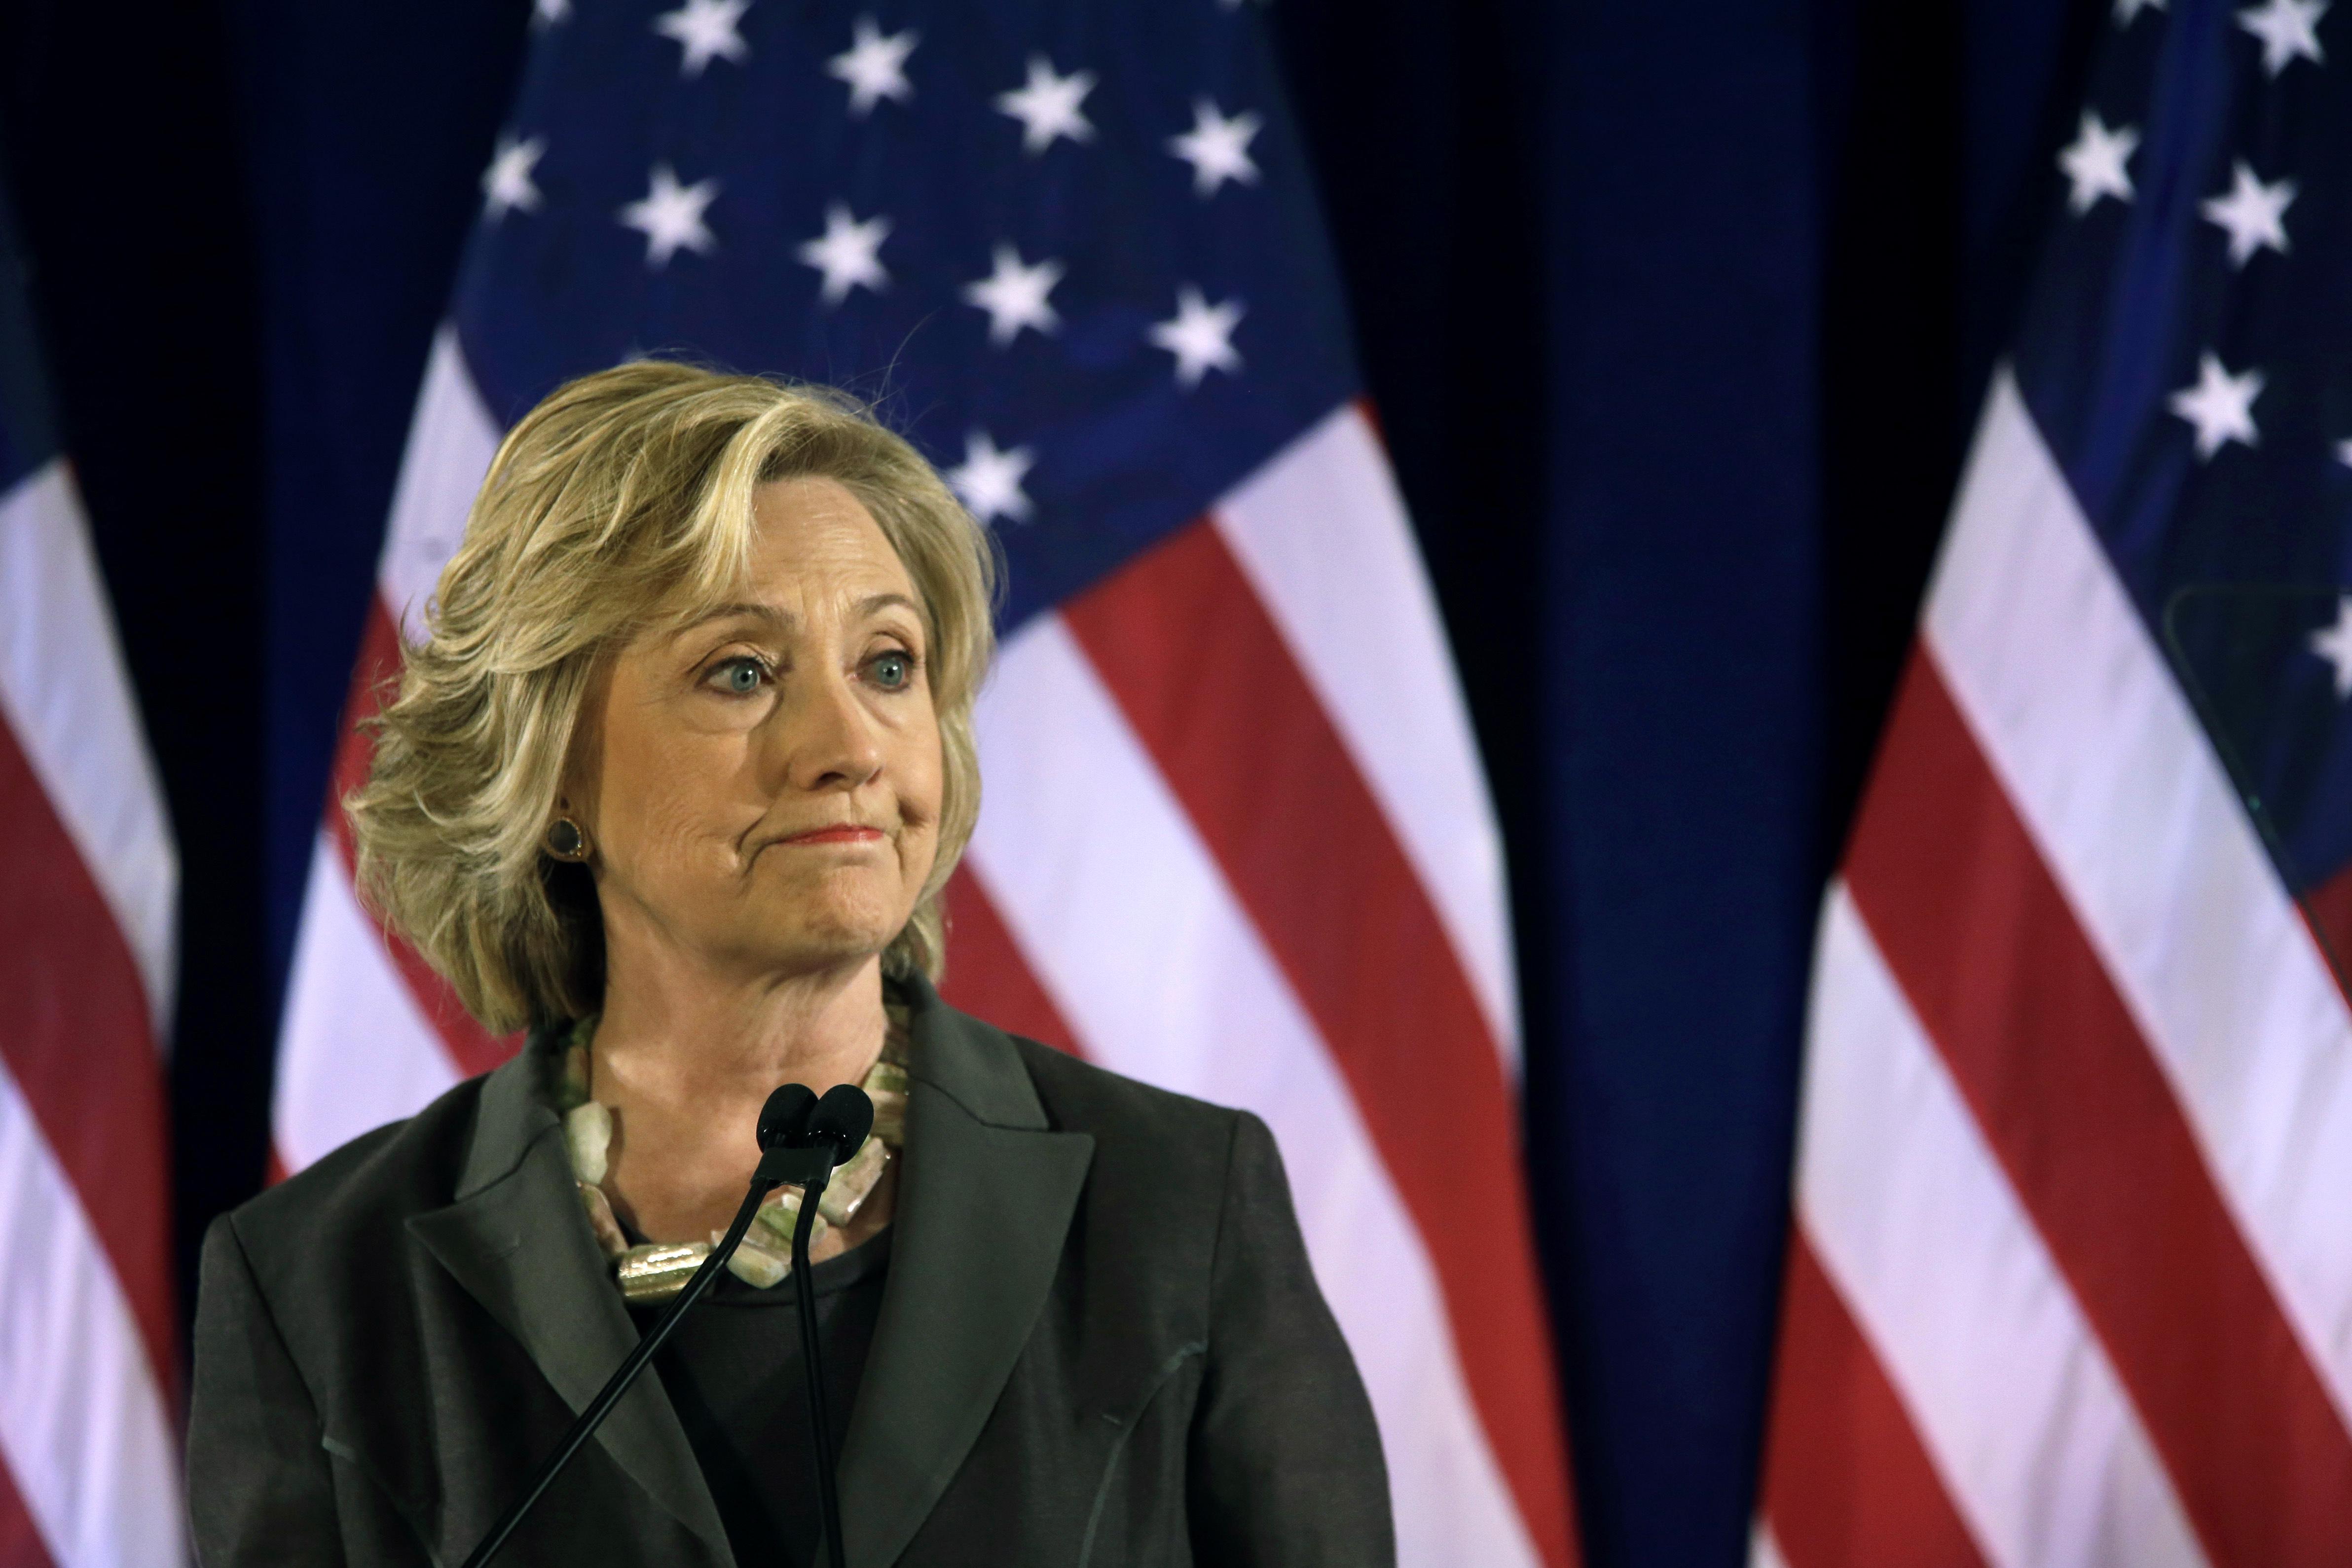 hillary clinton's nyc haircut cost $600 -- more than average